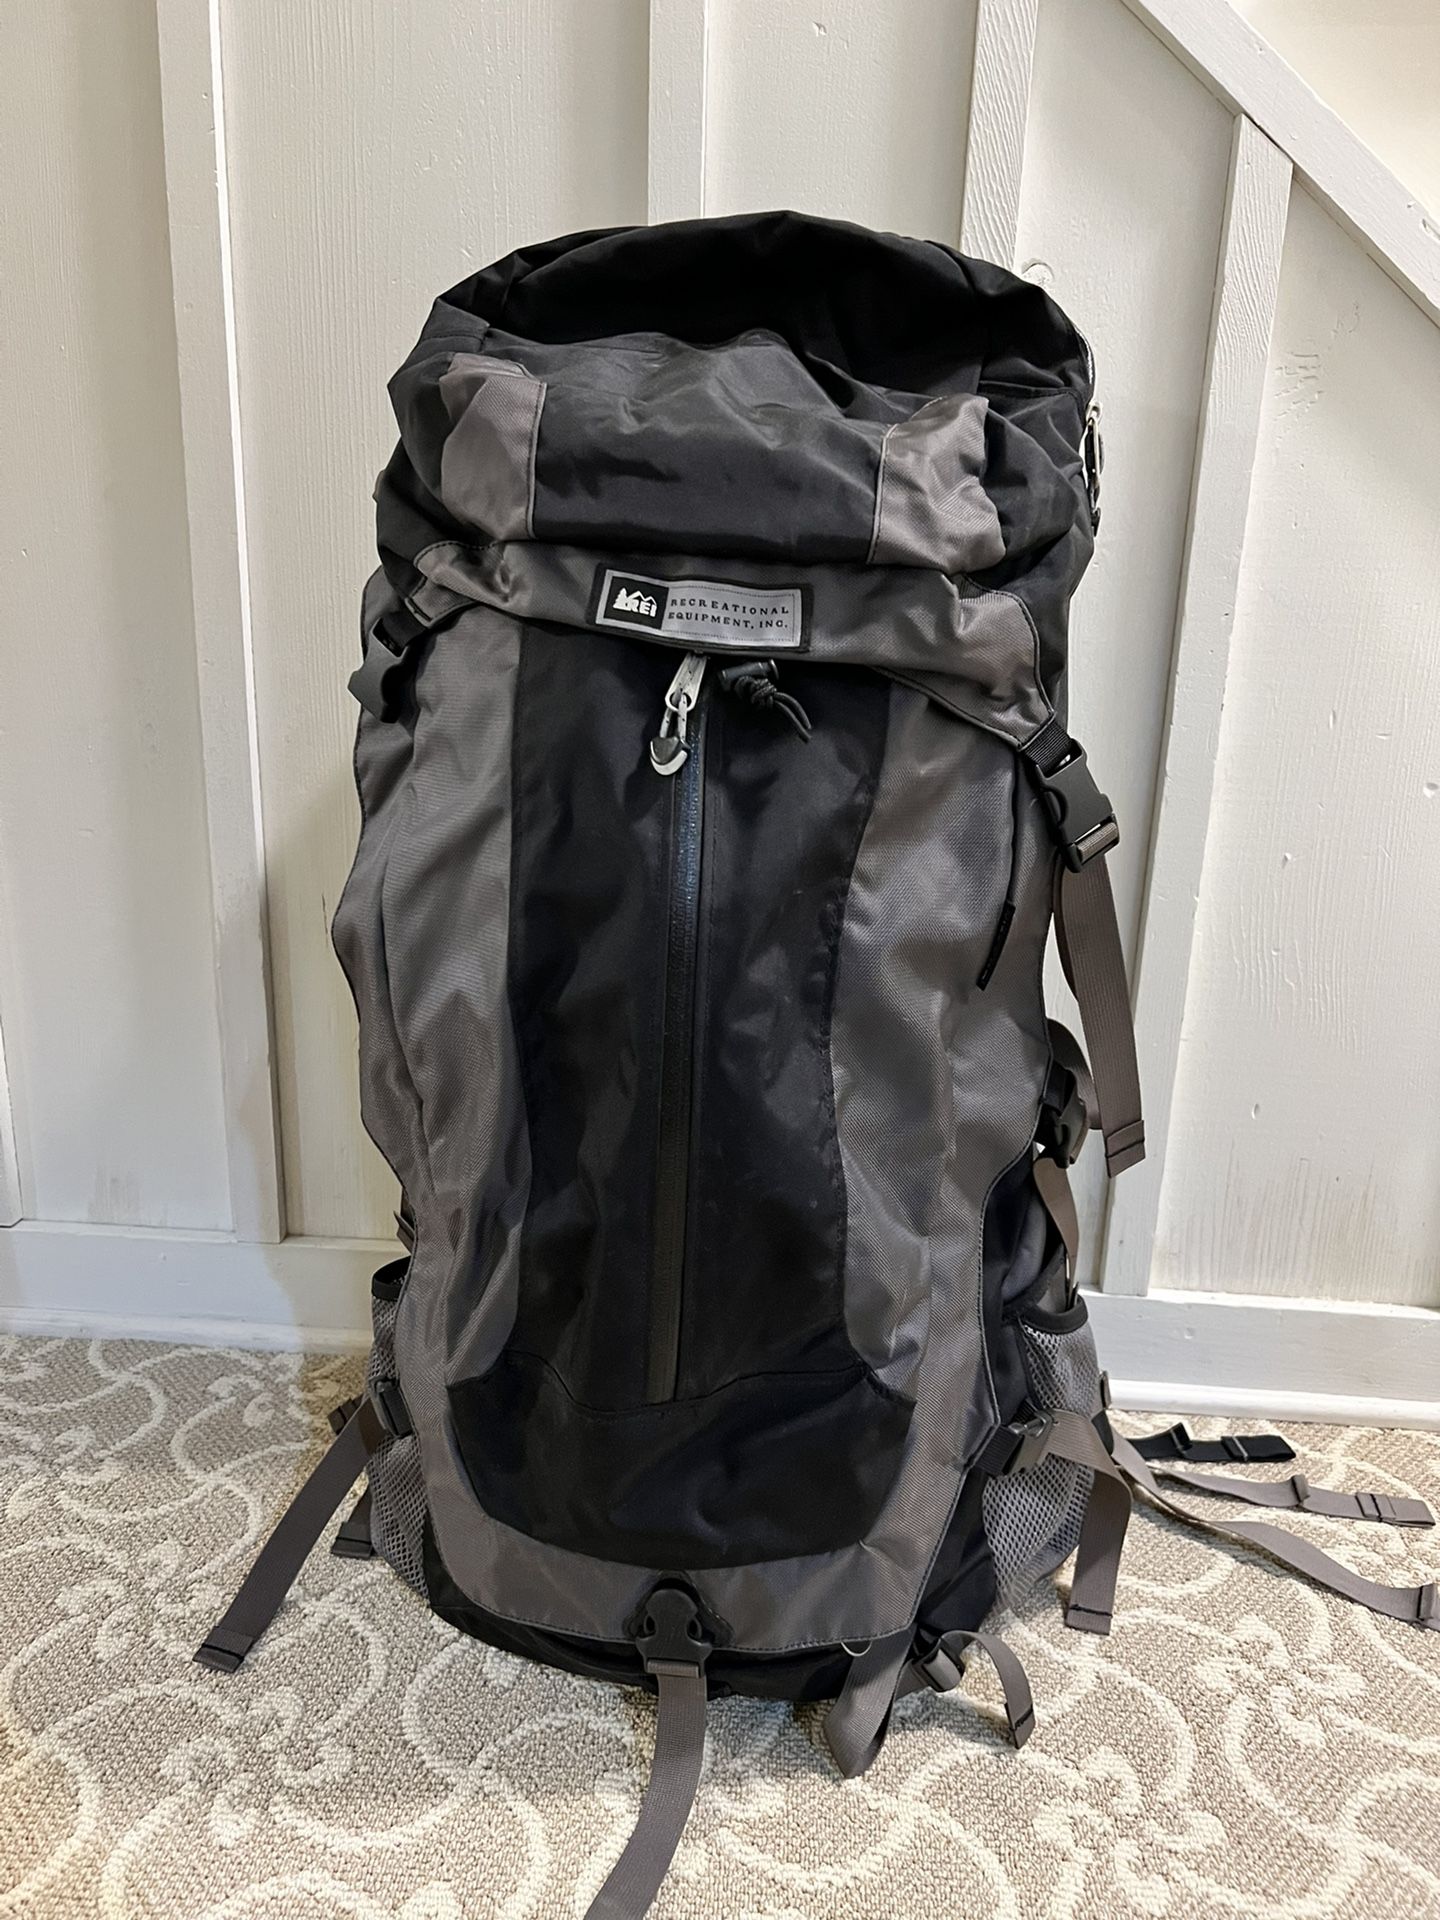 REI Mars Backpack size Large